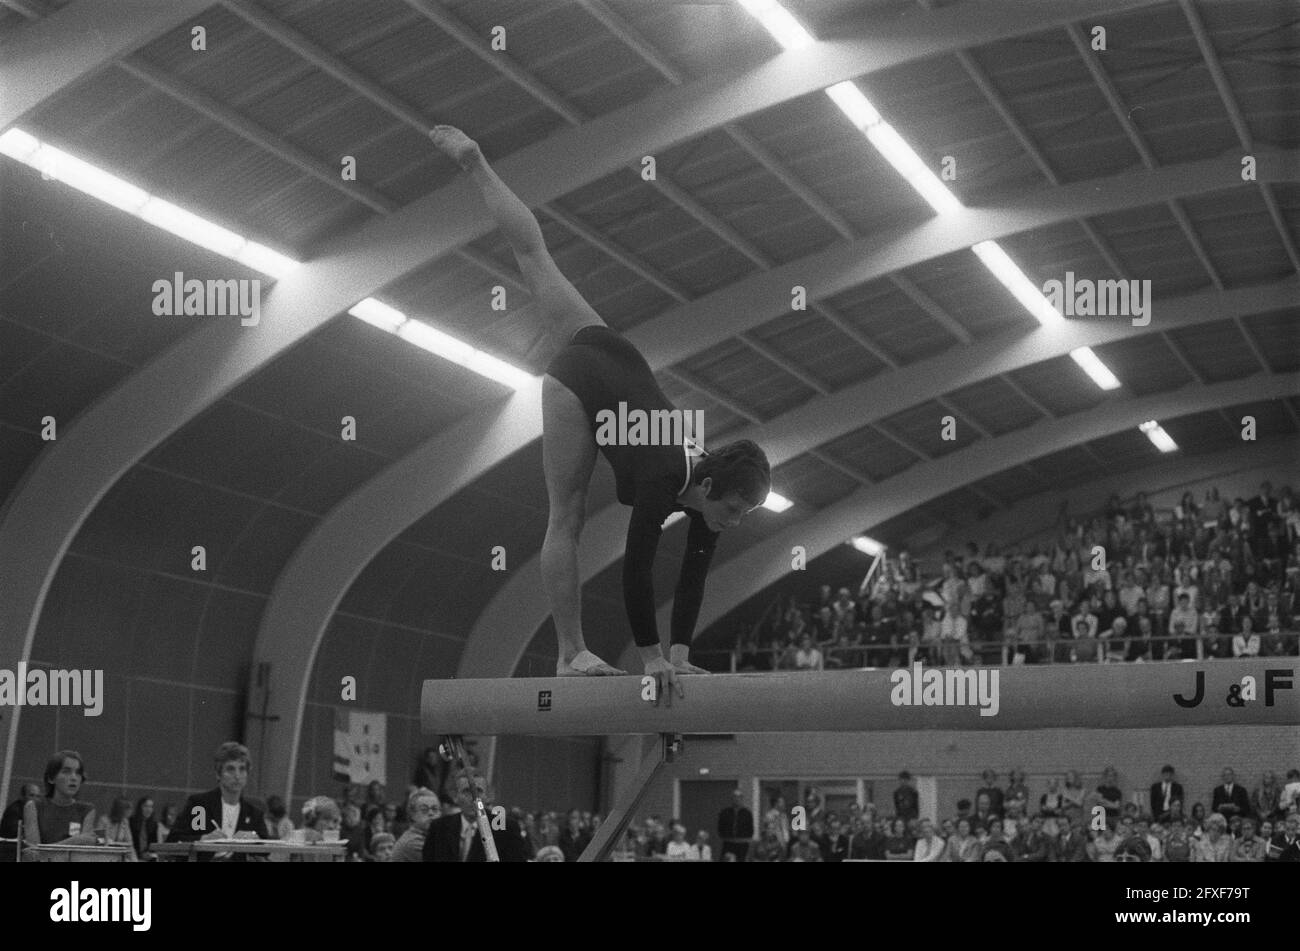 Gymnastics international tournament Netherlands-West-Germany in Groningen, 20 September 1969, gymnastics, gymnastics, The Netherlands, 20th century press agency photo, news to remember, documentary, historic photography 1945-1990, visual stories, human history of the Twentieth Century, capturing moments in time Stock Photo